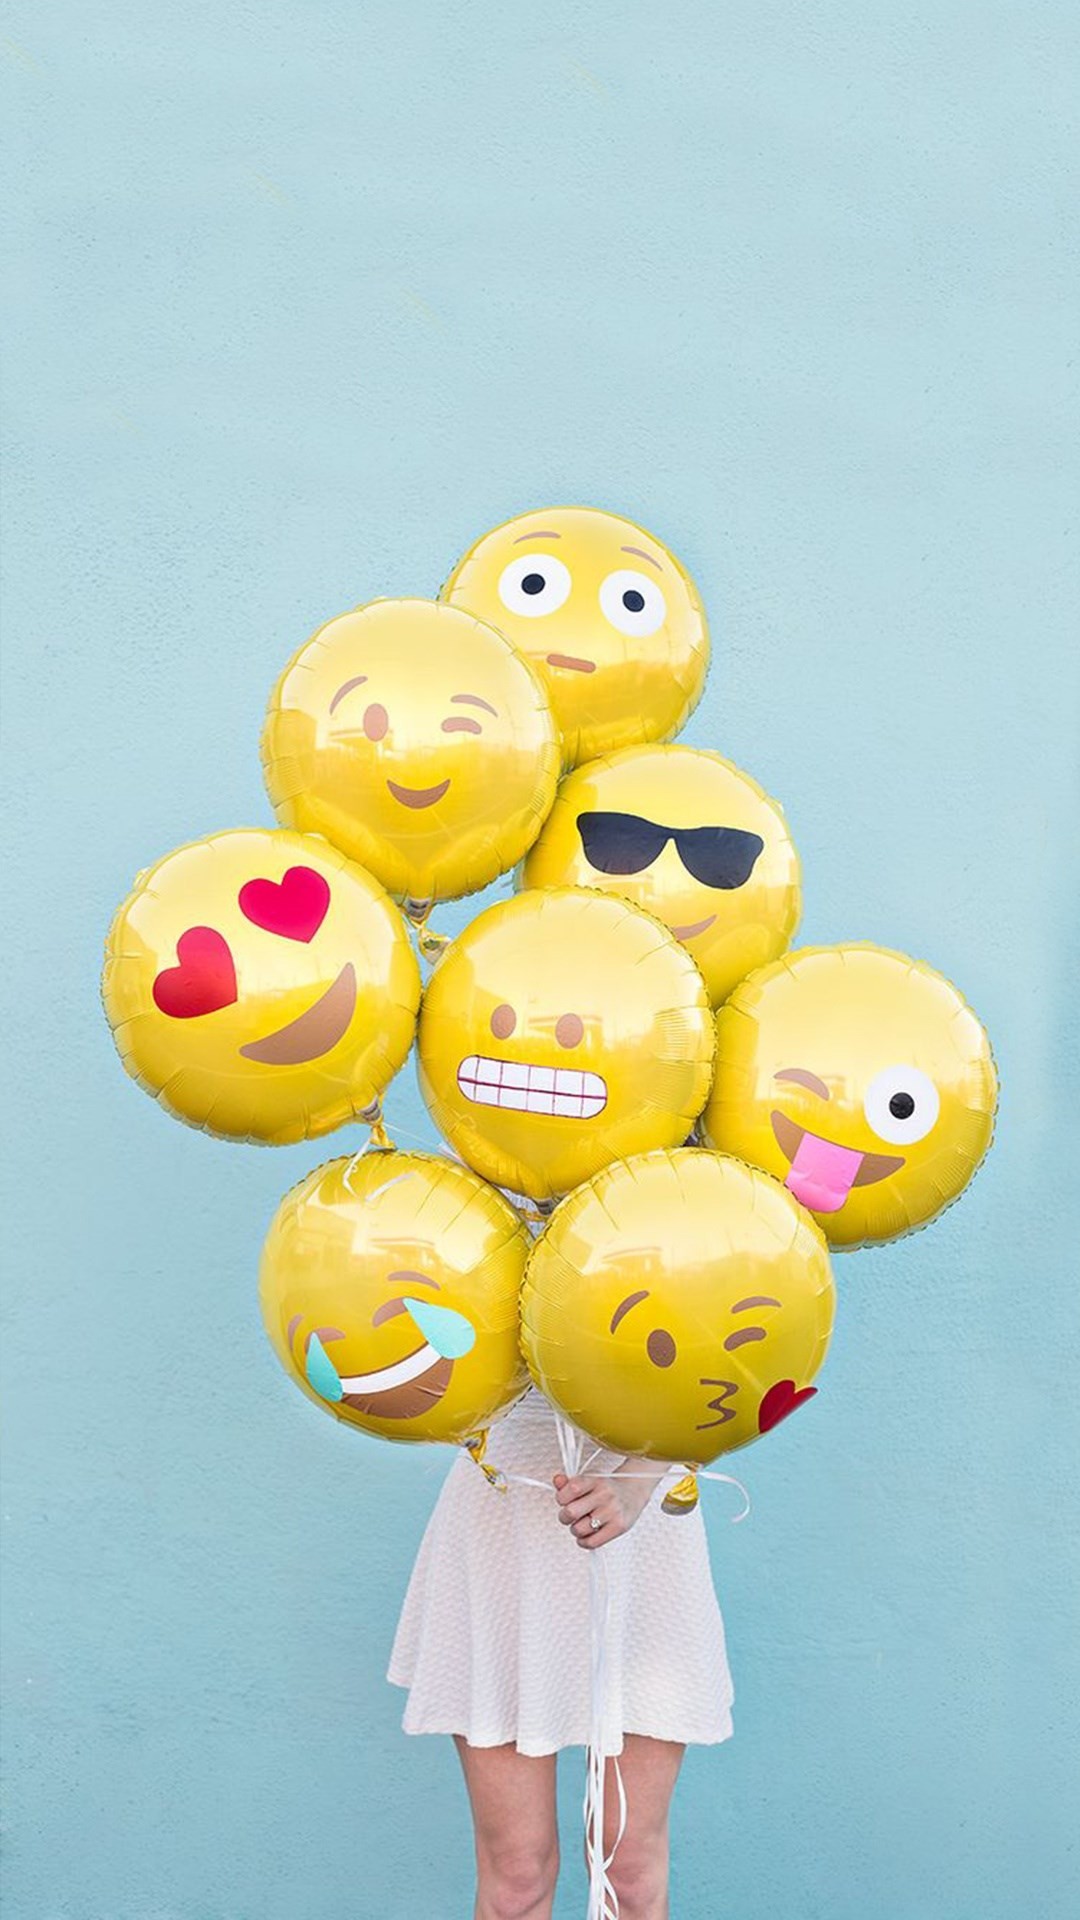 1080x1920 Abstract Funny Cute Emoji Balloons iPhone 8 wallpaper